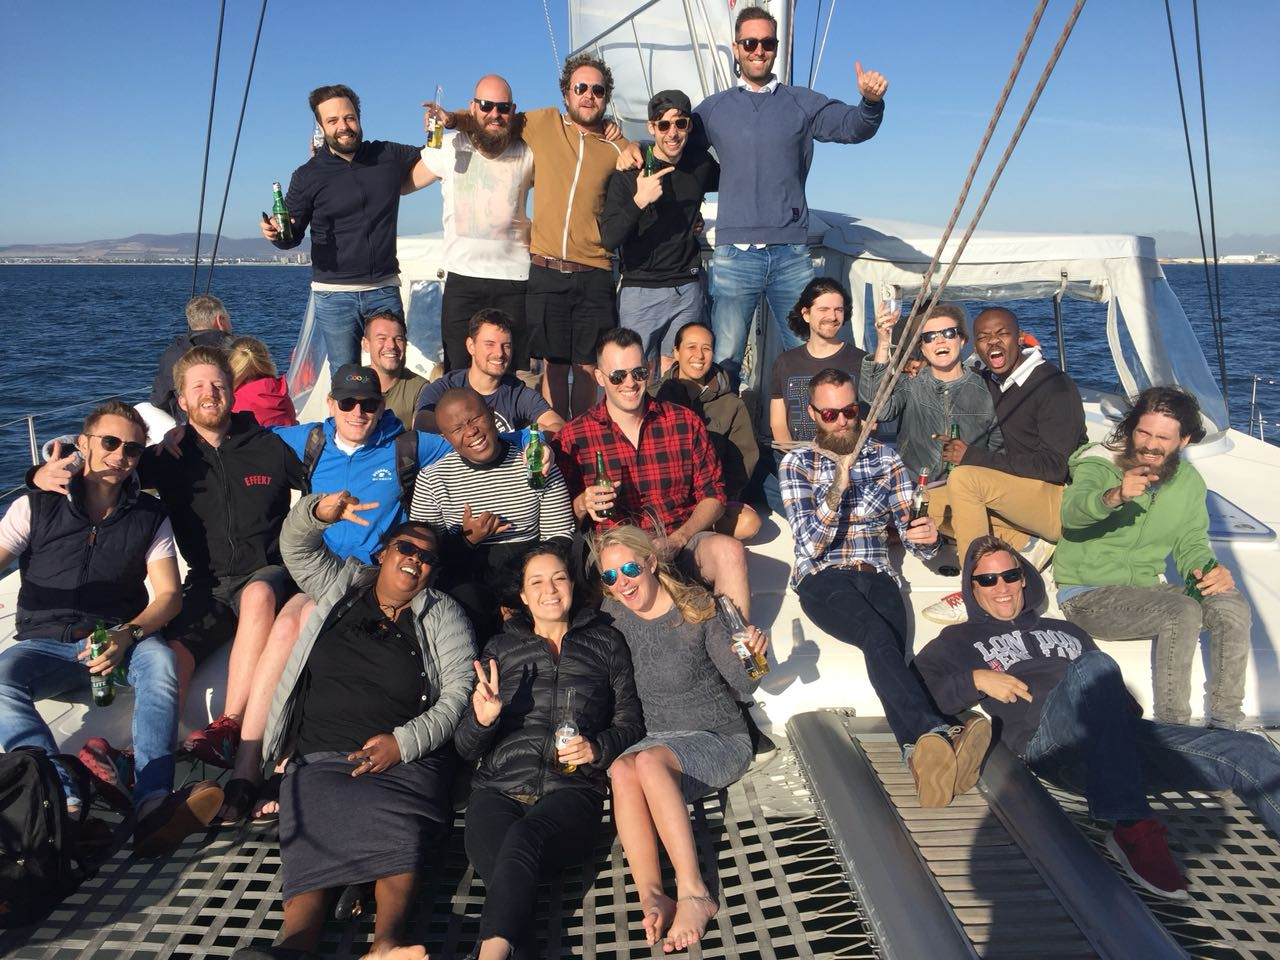 Nona Digital team saying cheers from a mf boat! - for Pangea.ai post.